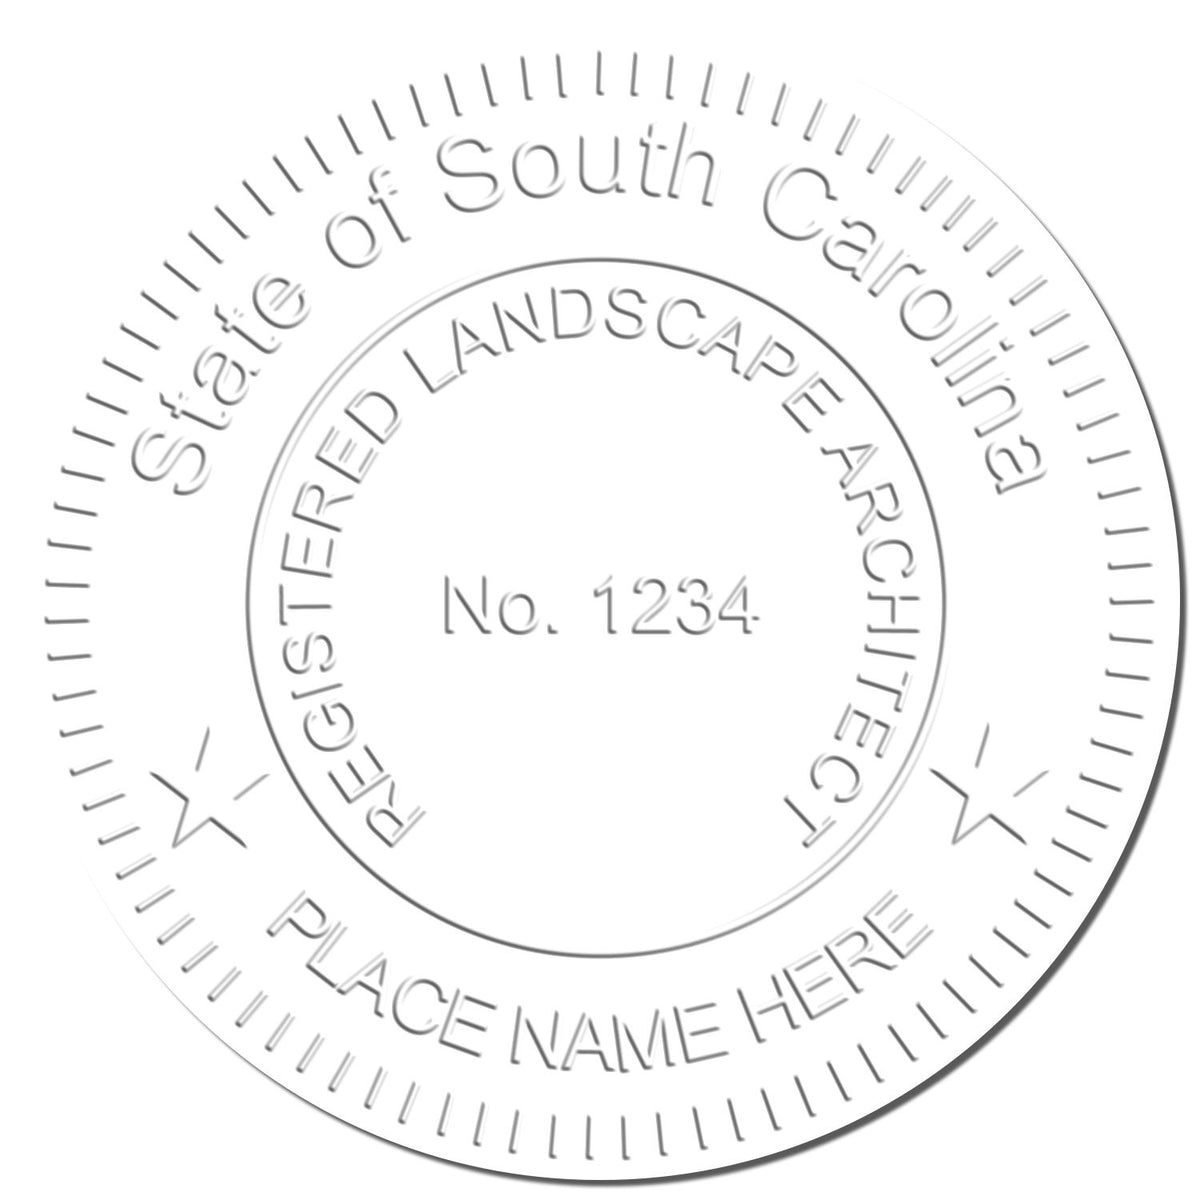 This paper is stamped with a sample imprint of the Gift South Carolina Landscape Architect Seal, signifying its quality and reliability.